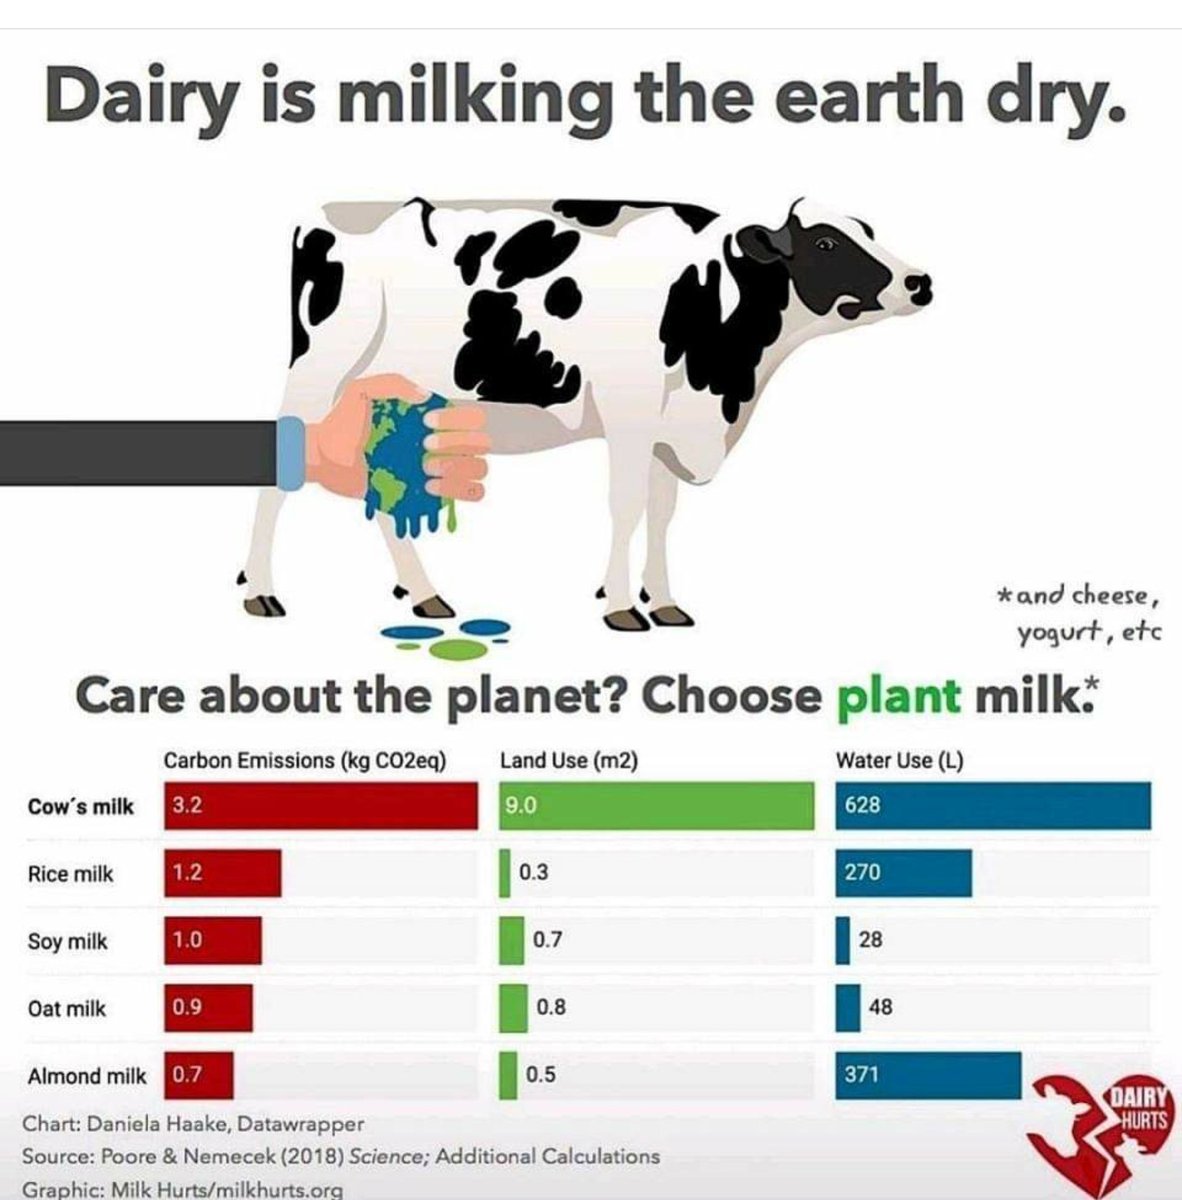 Diary industry is the cruelest industry on earth...
Damaging the life of mother and baby calves 
Damaging the earth.
#diaryismurder 
#diaryisbeefindustry 
Think about the planet before consuming diary products...
#saveearth